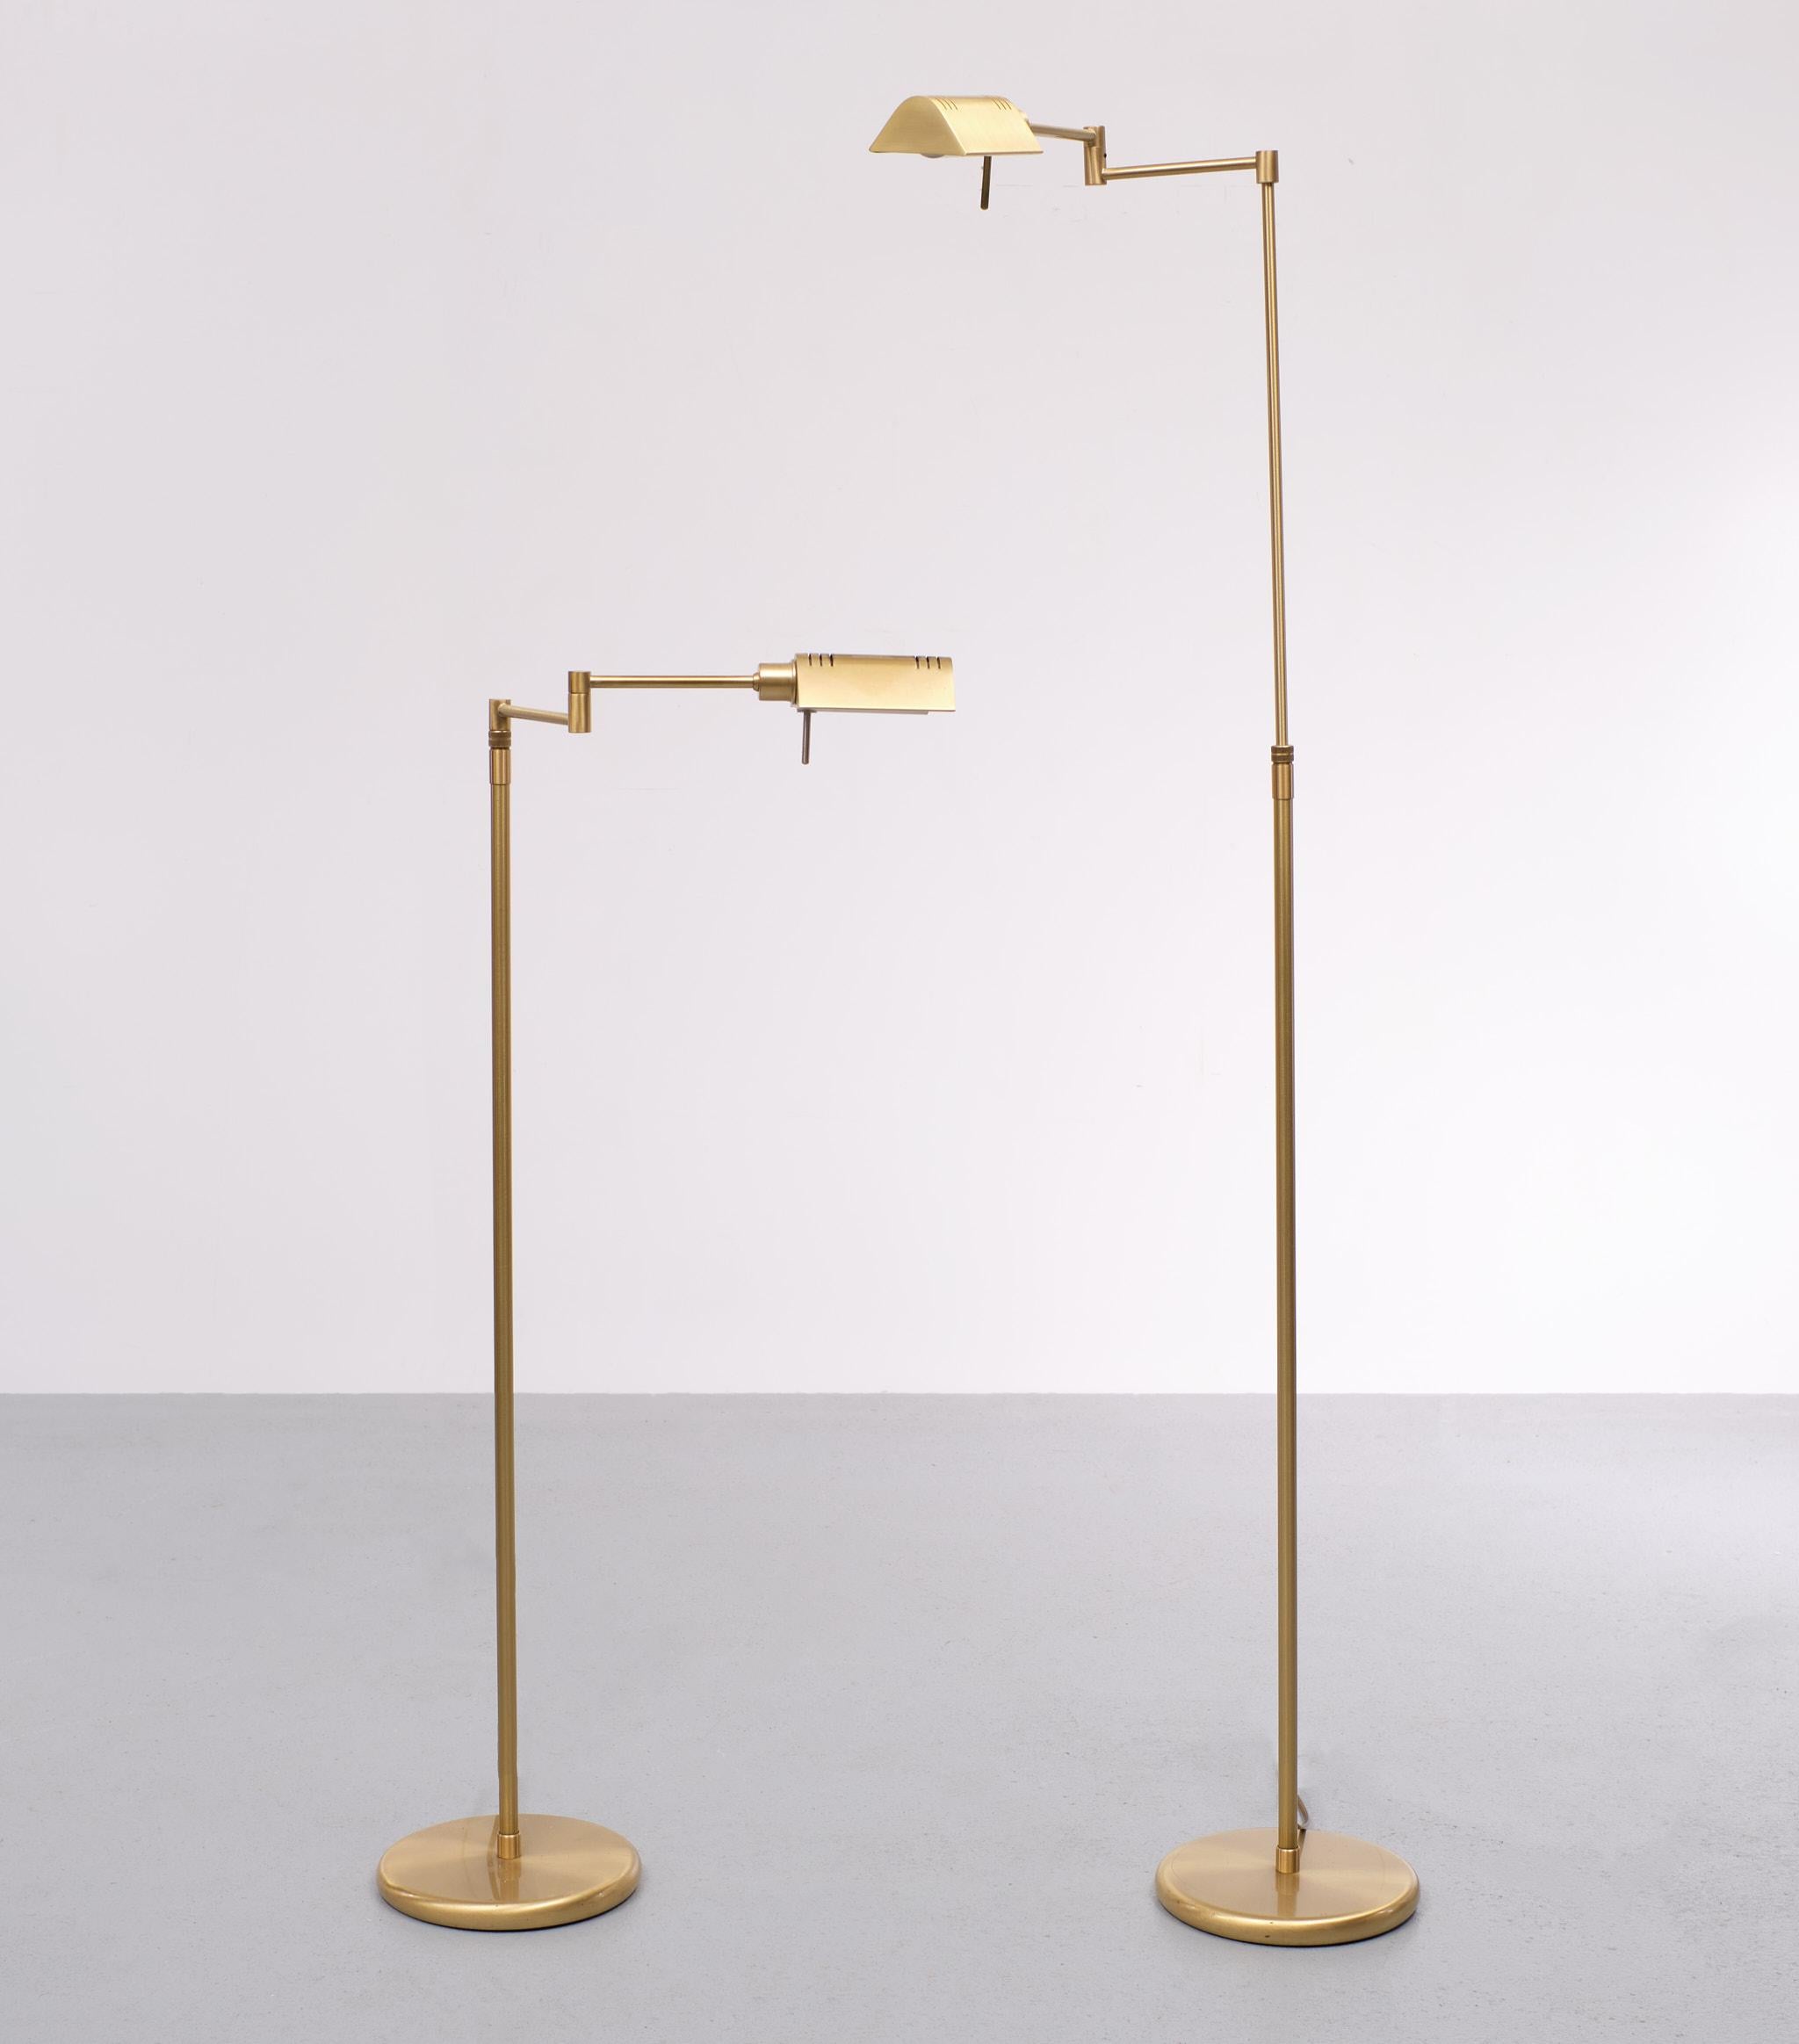 Two identical Holtkötter, Swing arm floor lamps. Brass. Halogen with good working 
dimmers. Adjustable in hight. 100 cm to 147 cm very nice quality and condition.